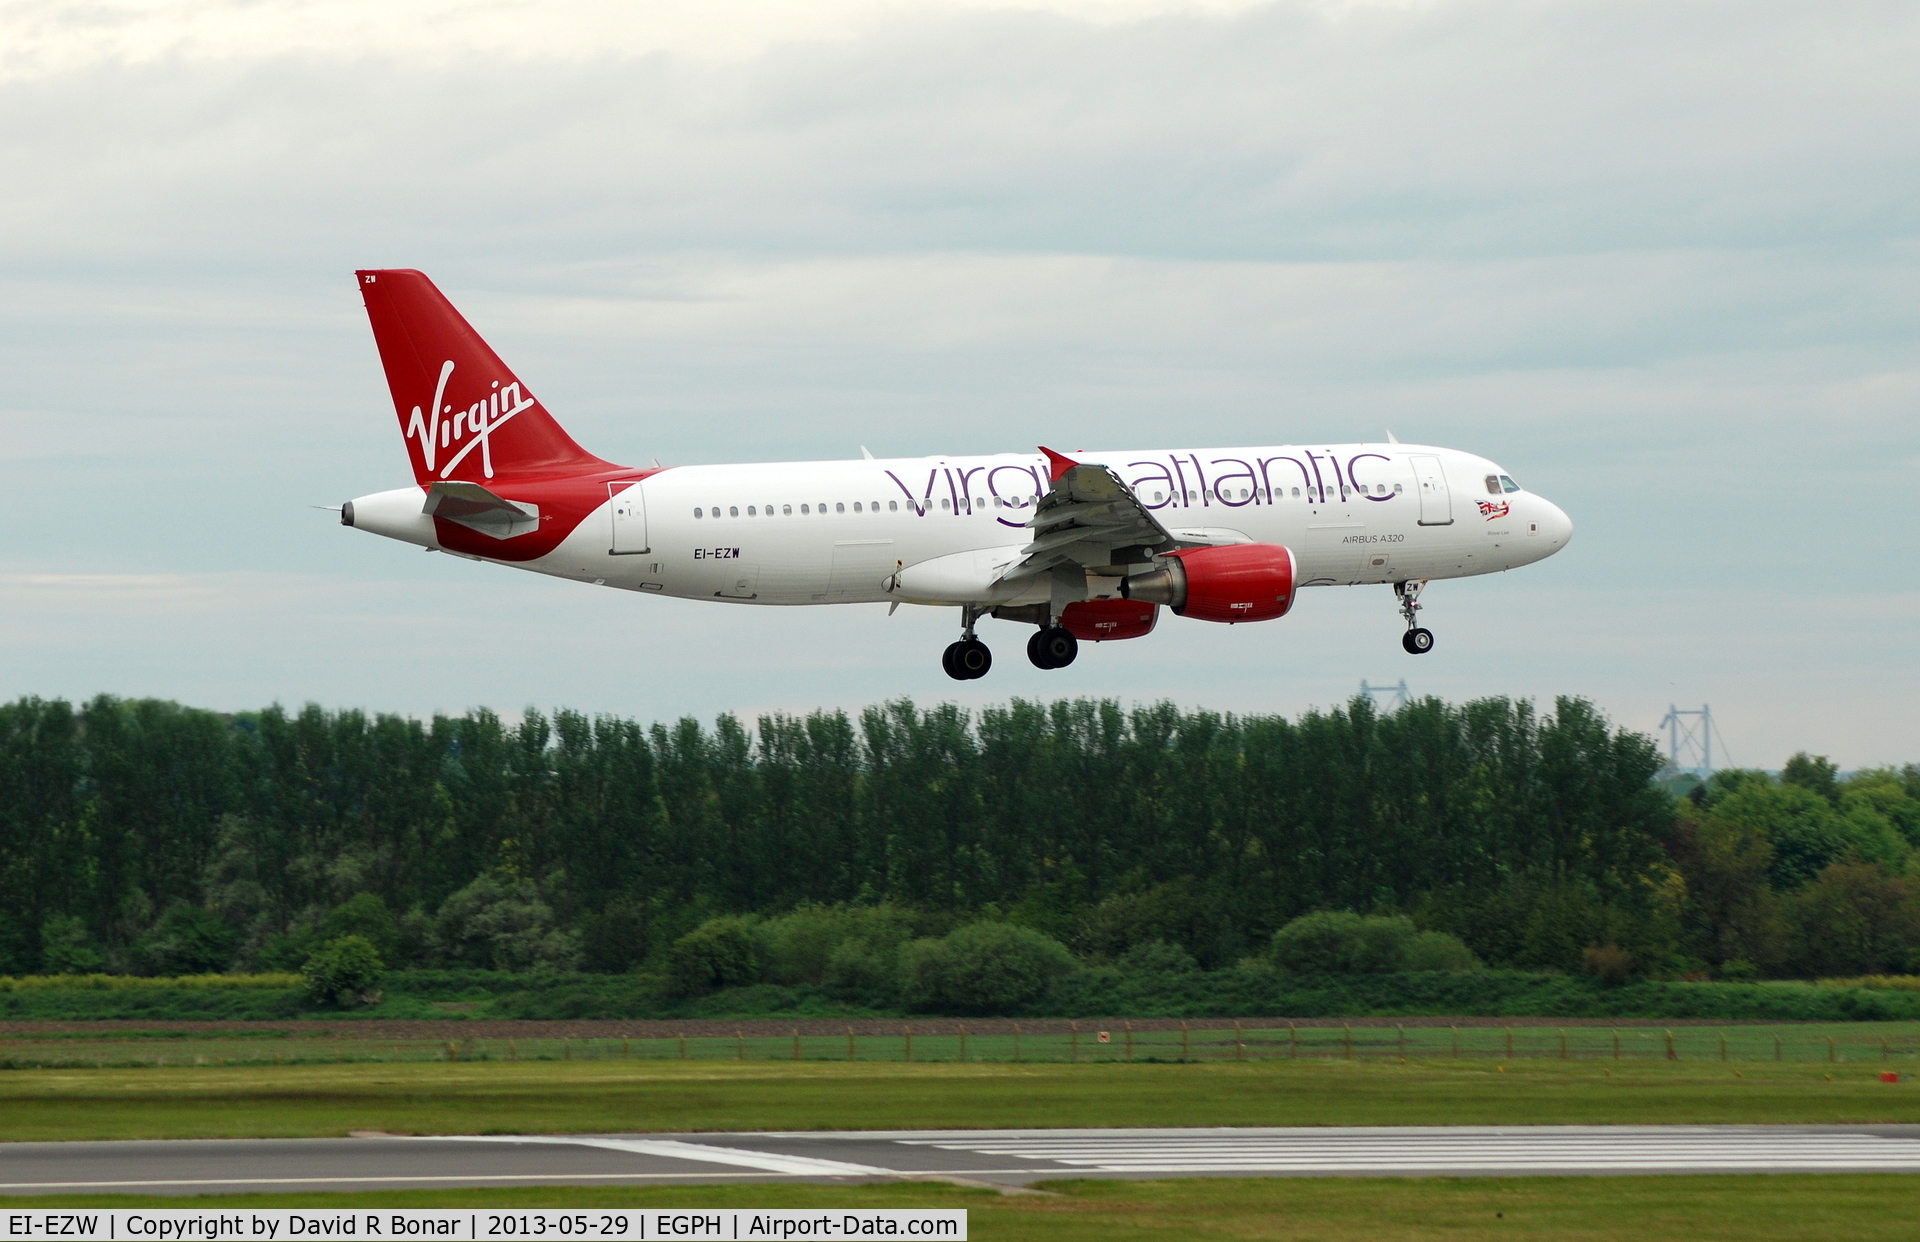 EI-EZW, 2003 Airbus A320-214 C/N 1983, Virgin Atlantic are now running internal UK services. Seen here arriving from London Heathrow.
Aircraft on lease from Aer Lingus